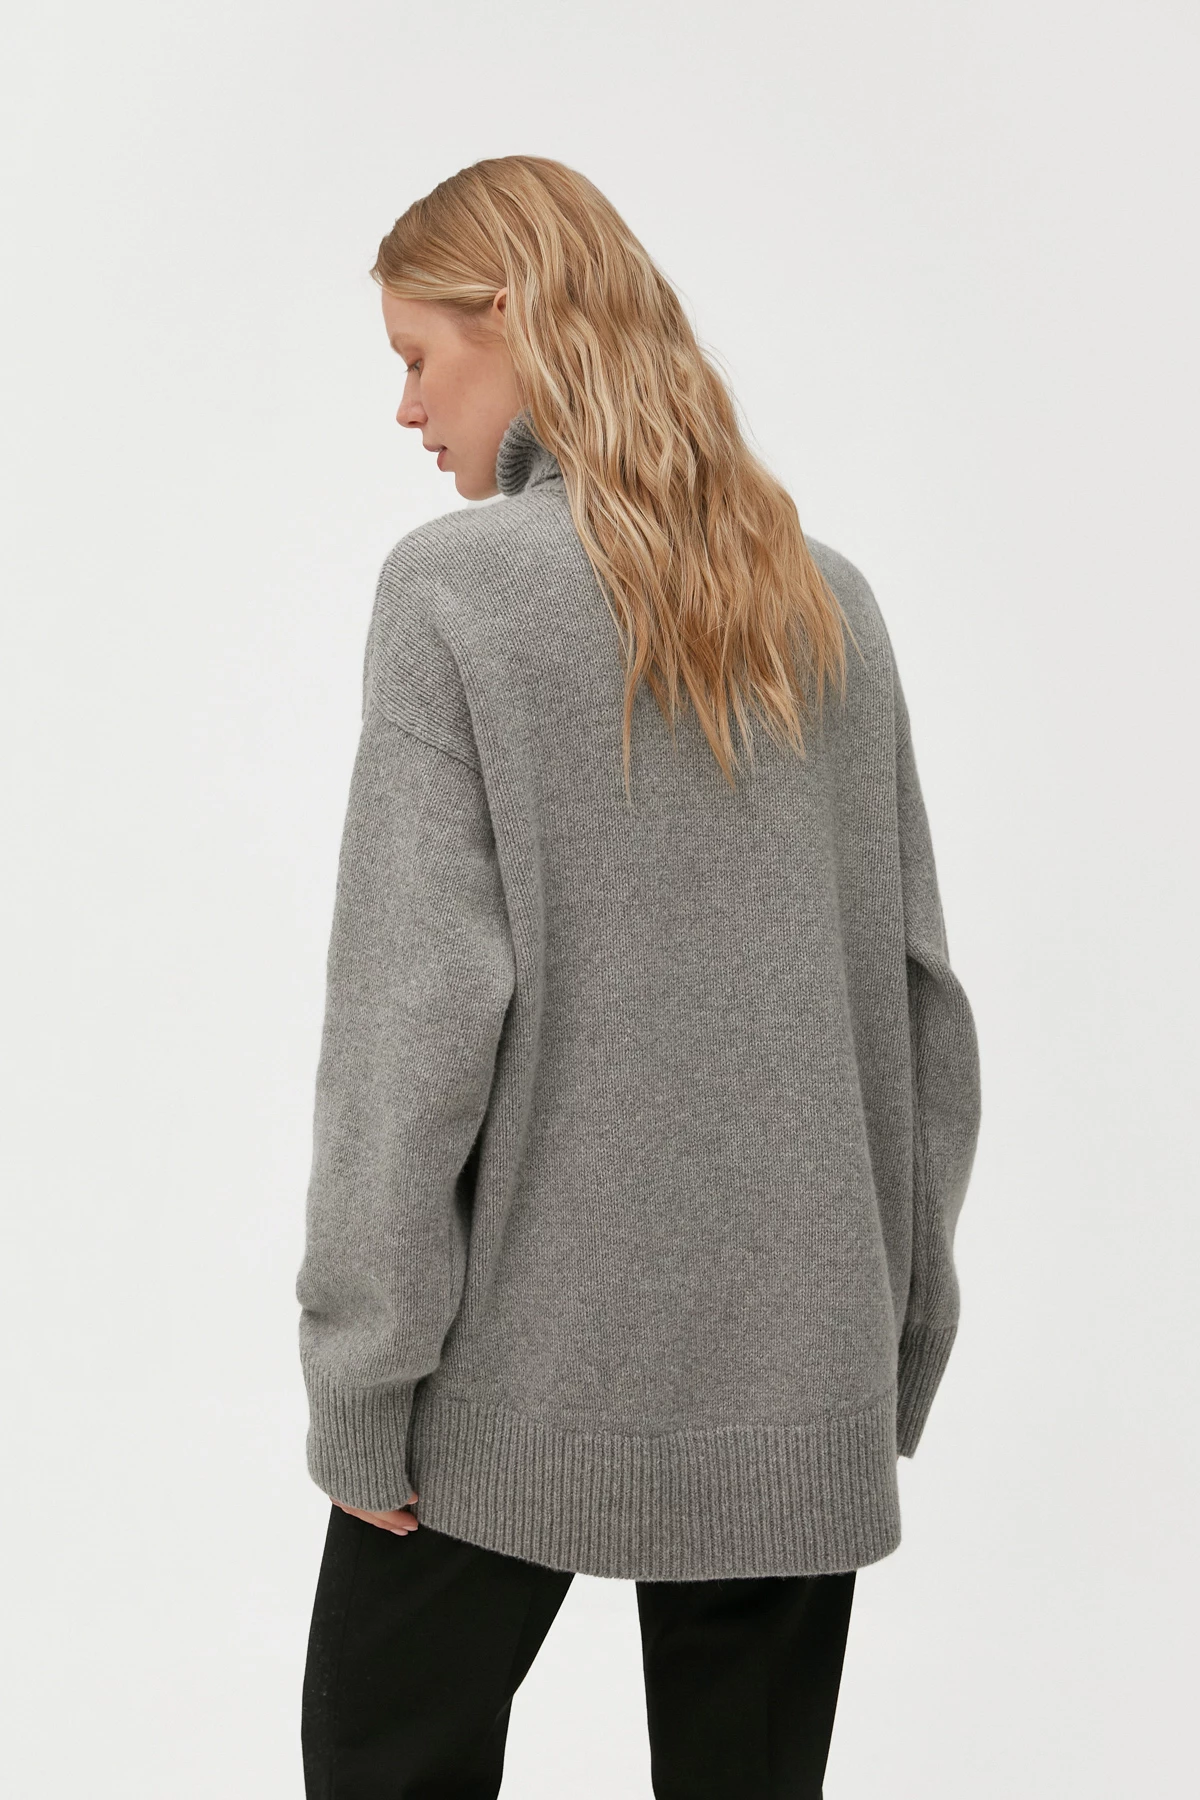 Cashmere grey high neck loose-fit sweater, photo 4